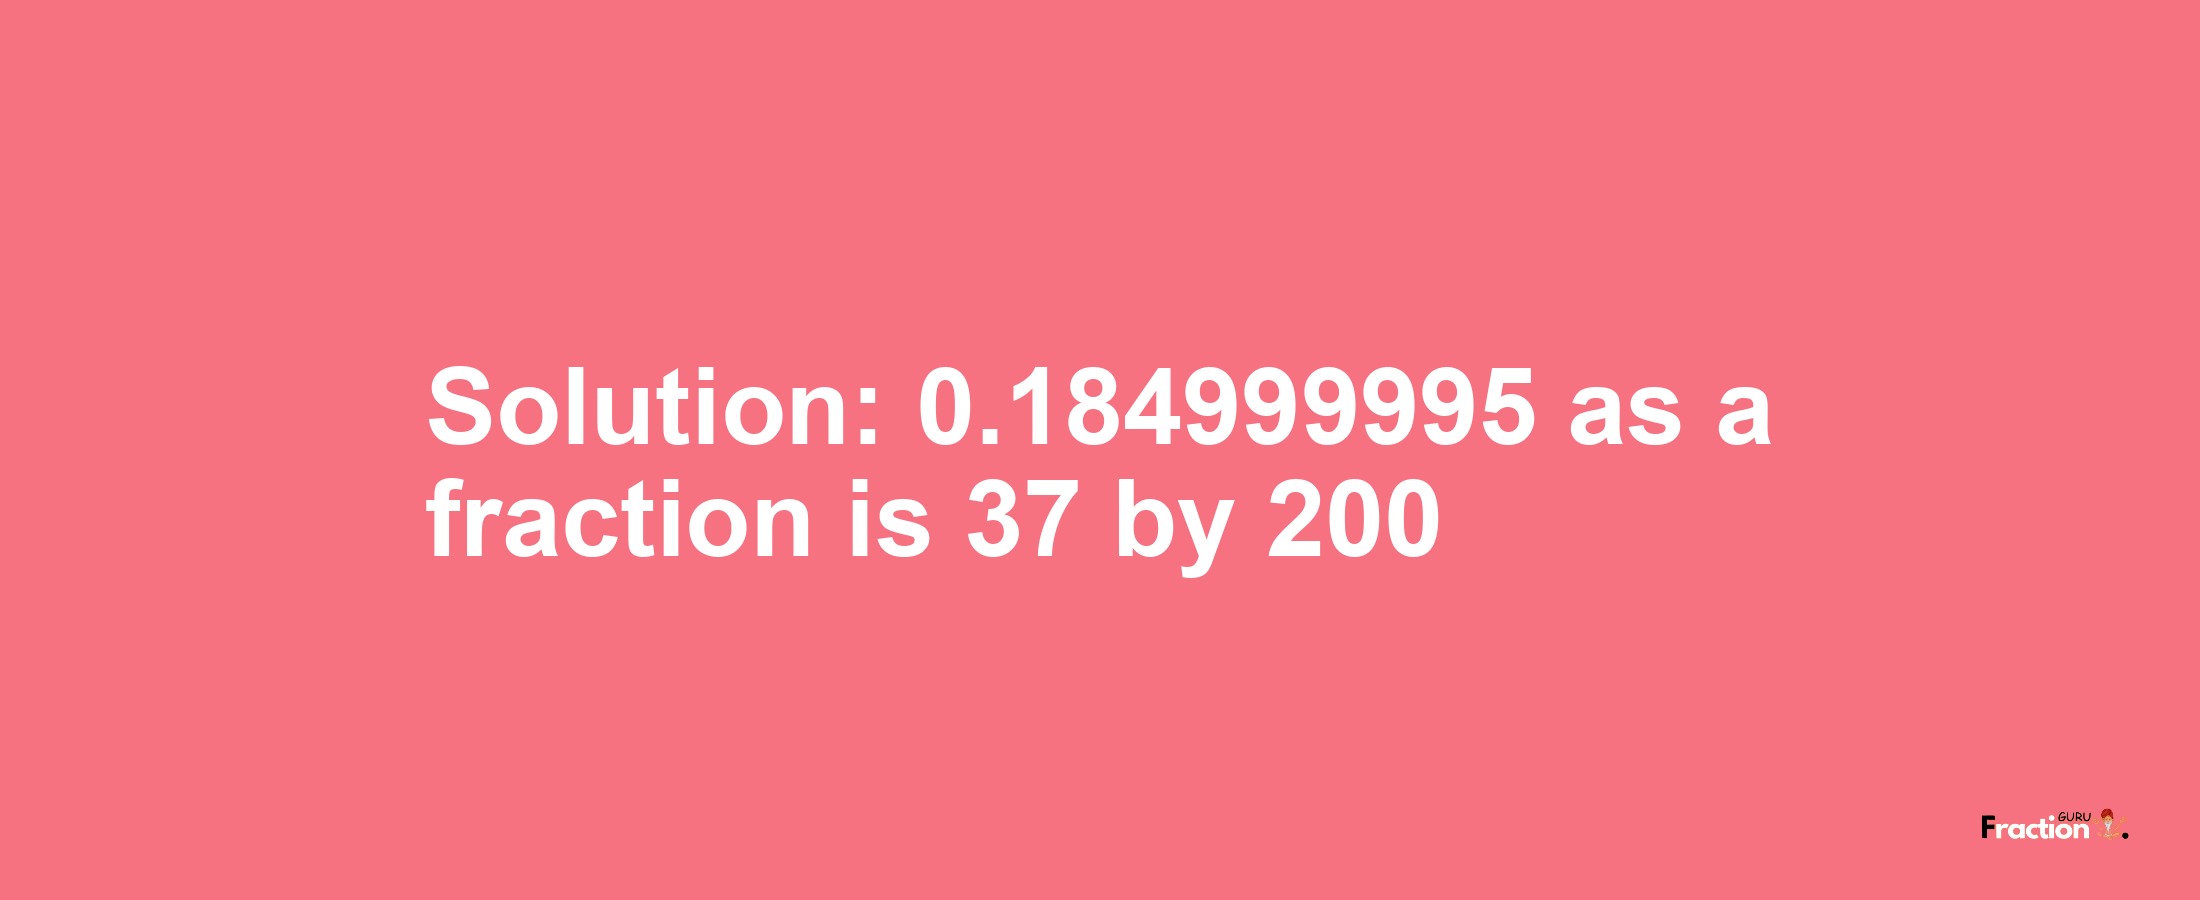 Solution:0.184999995 as a fraction is 37/200